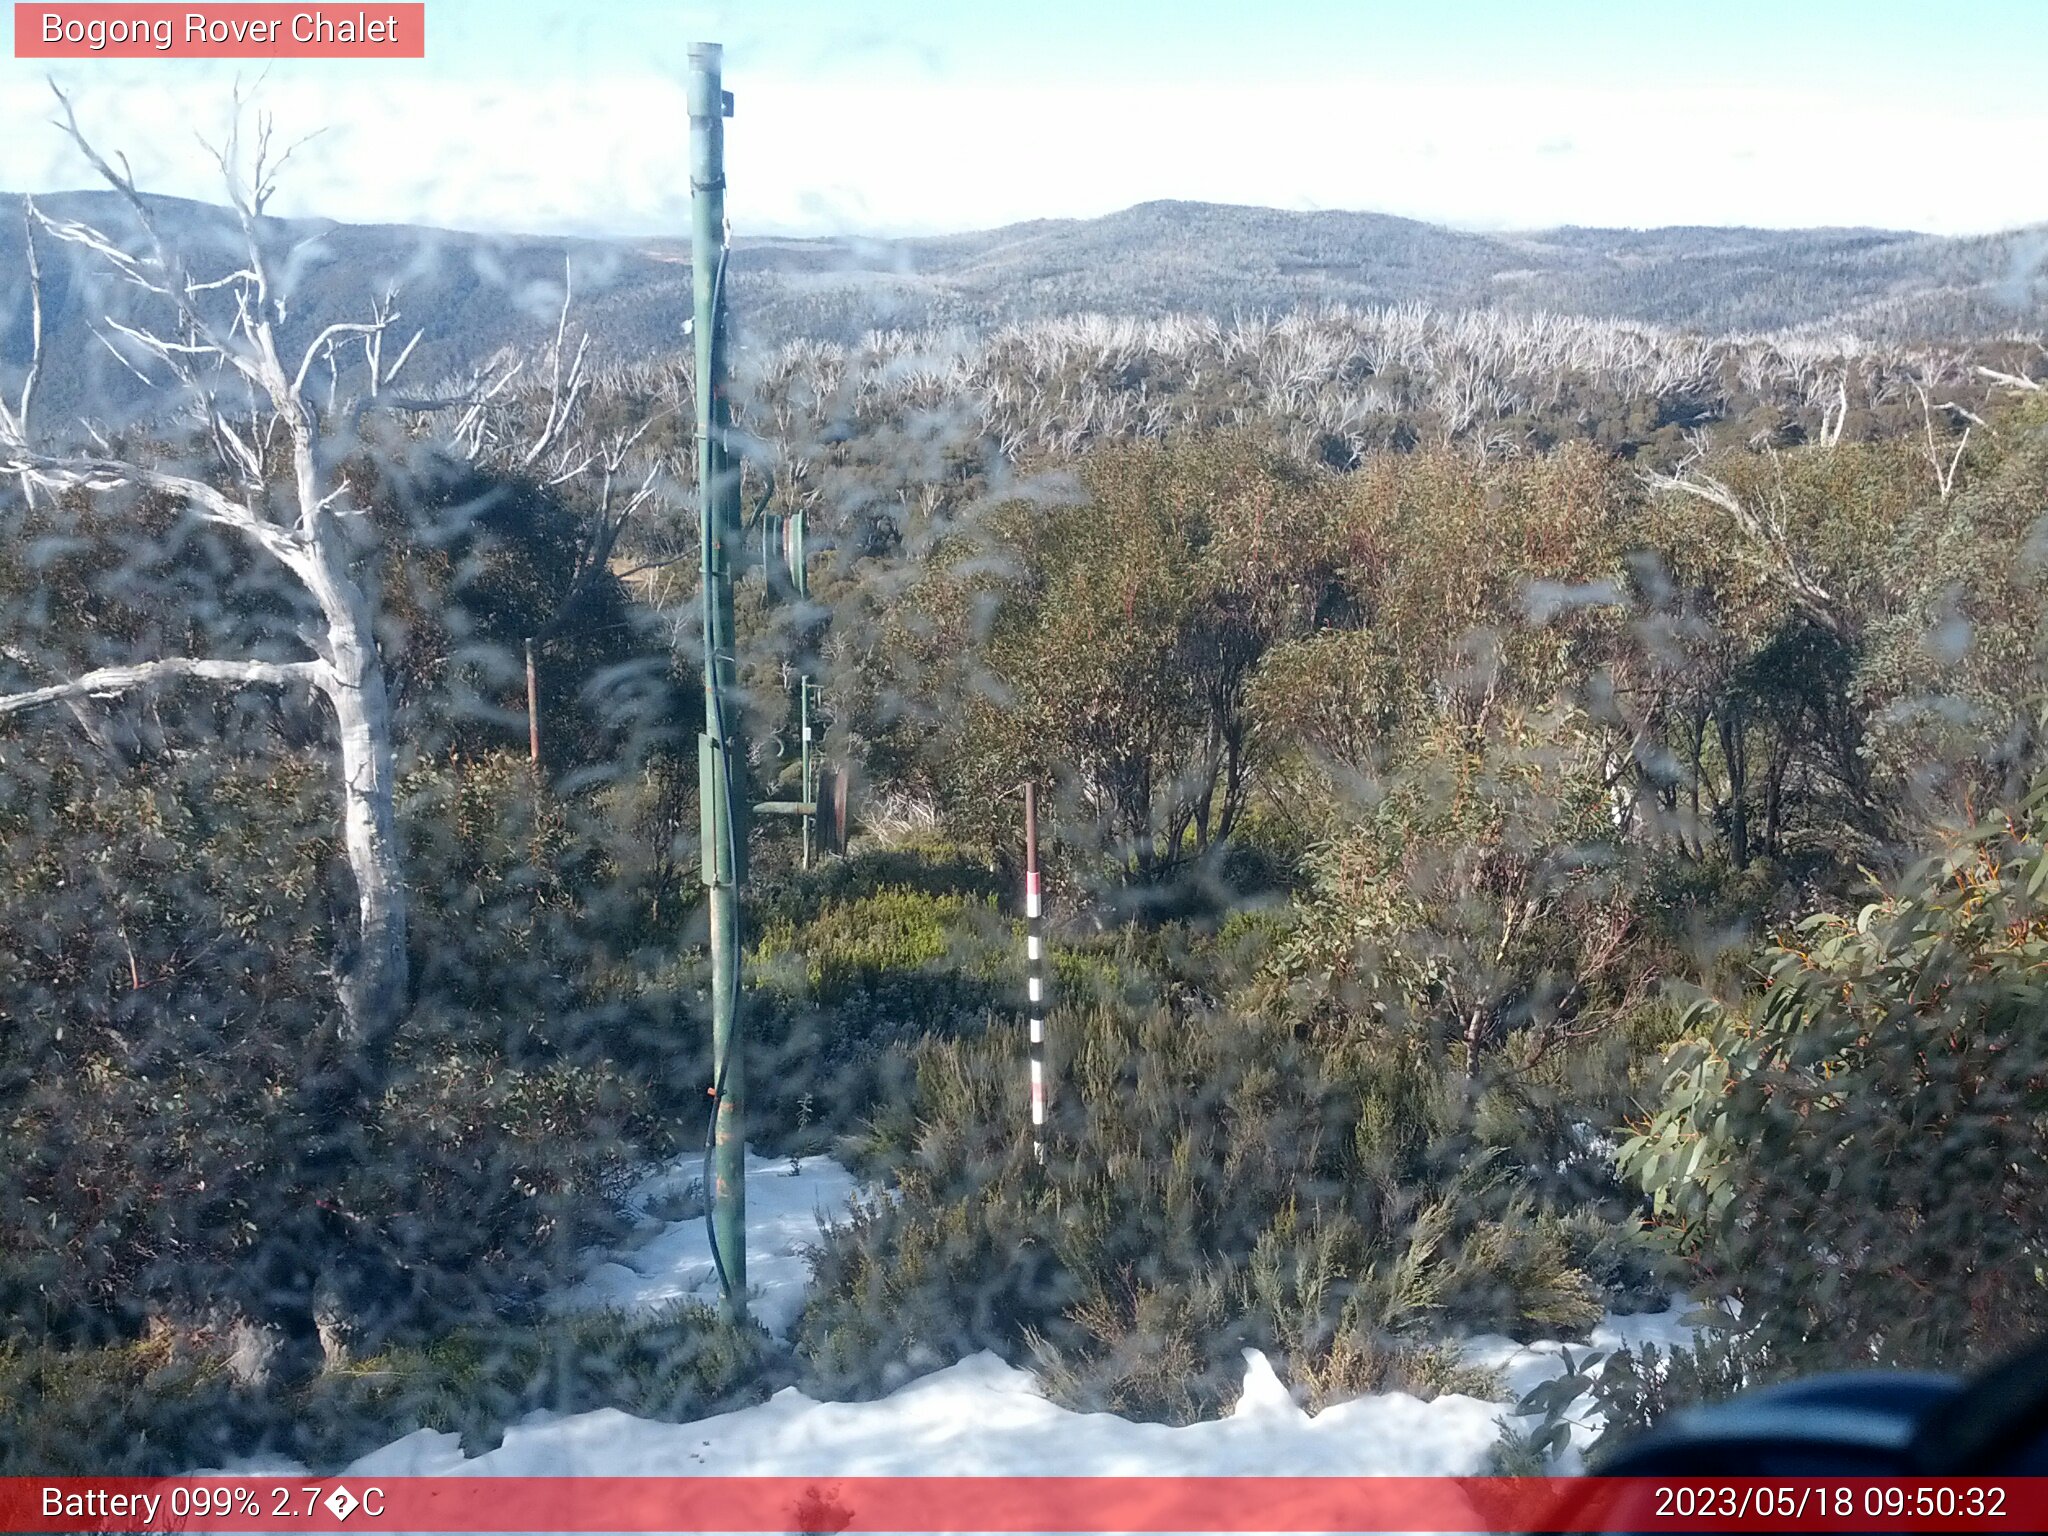 Bogong Web Cam 9:50am Thursday 18th of May 2023